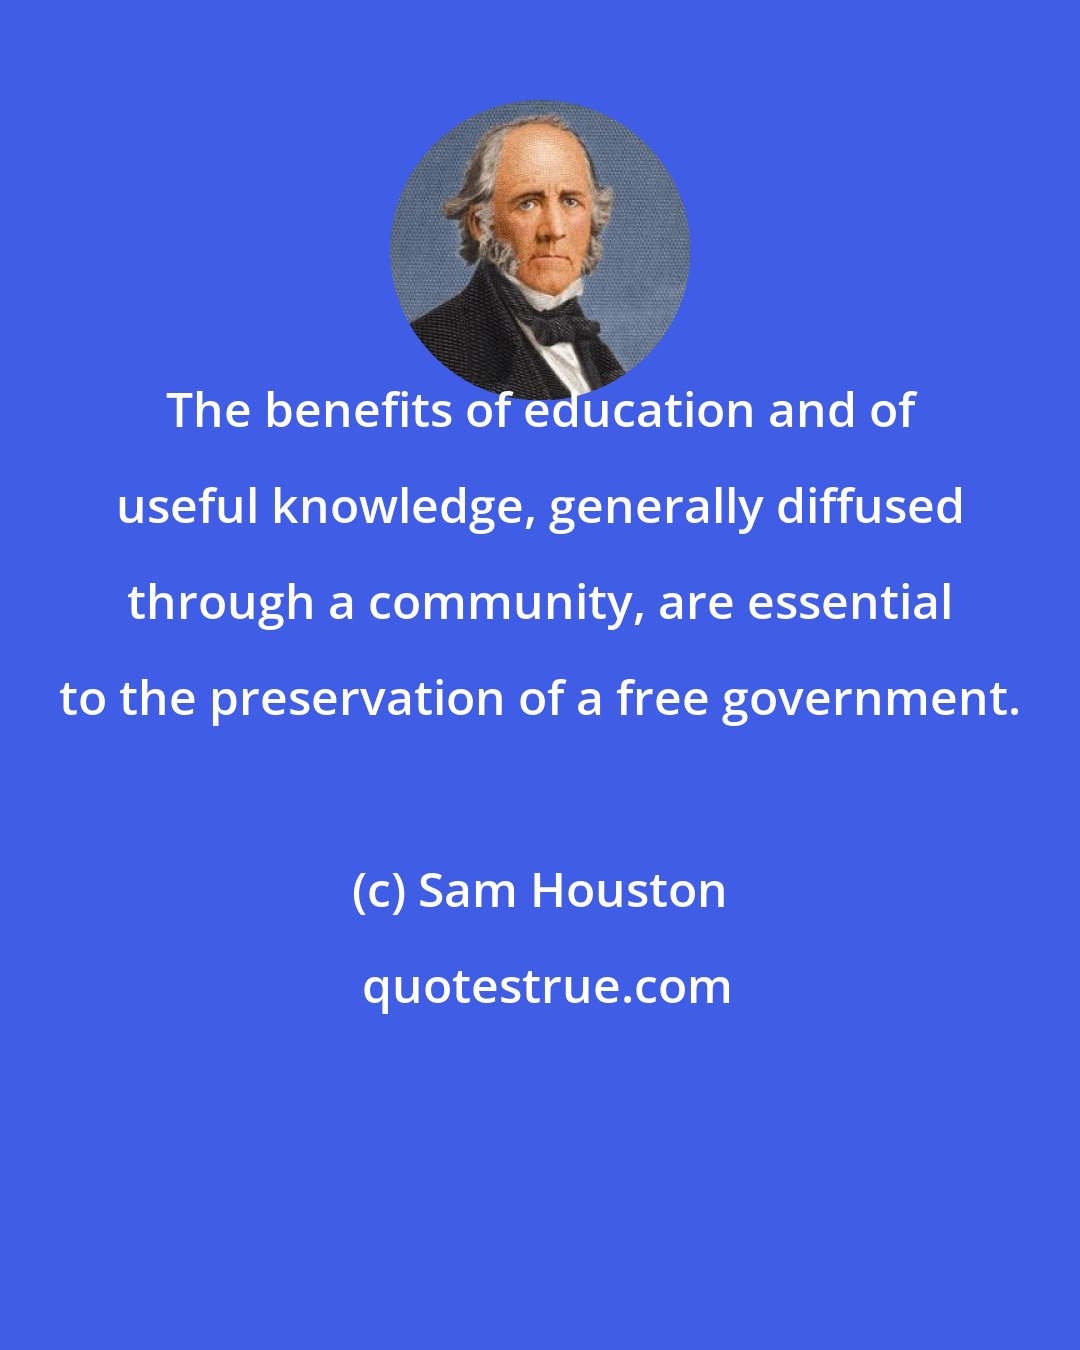 Sam Houston: The benefits of education and of useful knowledge, generally diffused through a community, are essential to the preservation of a free government.